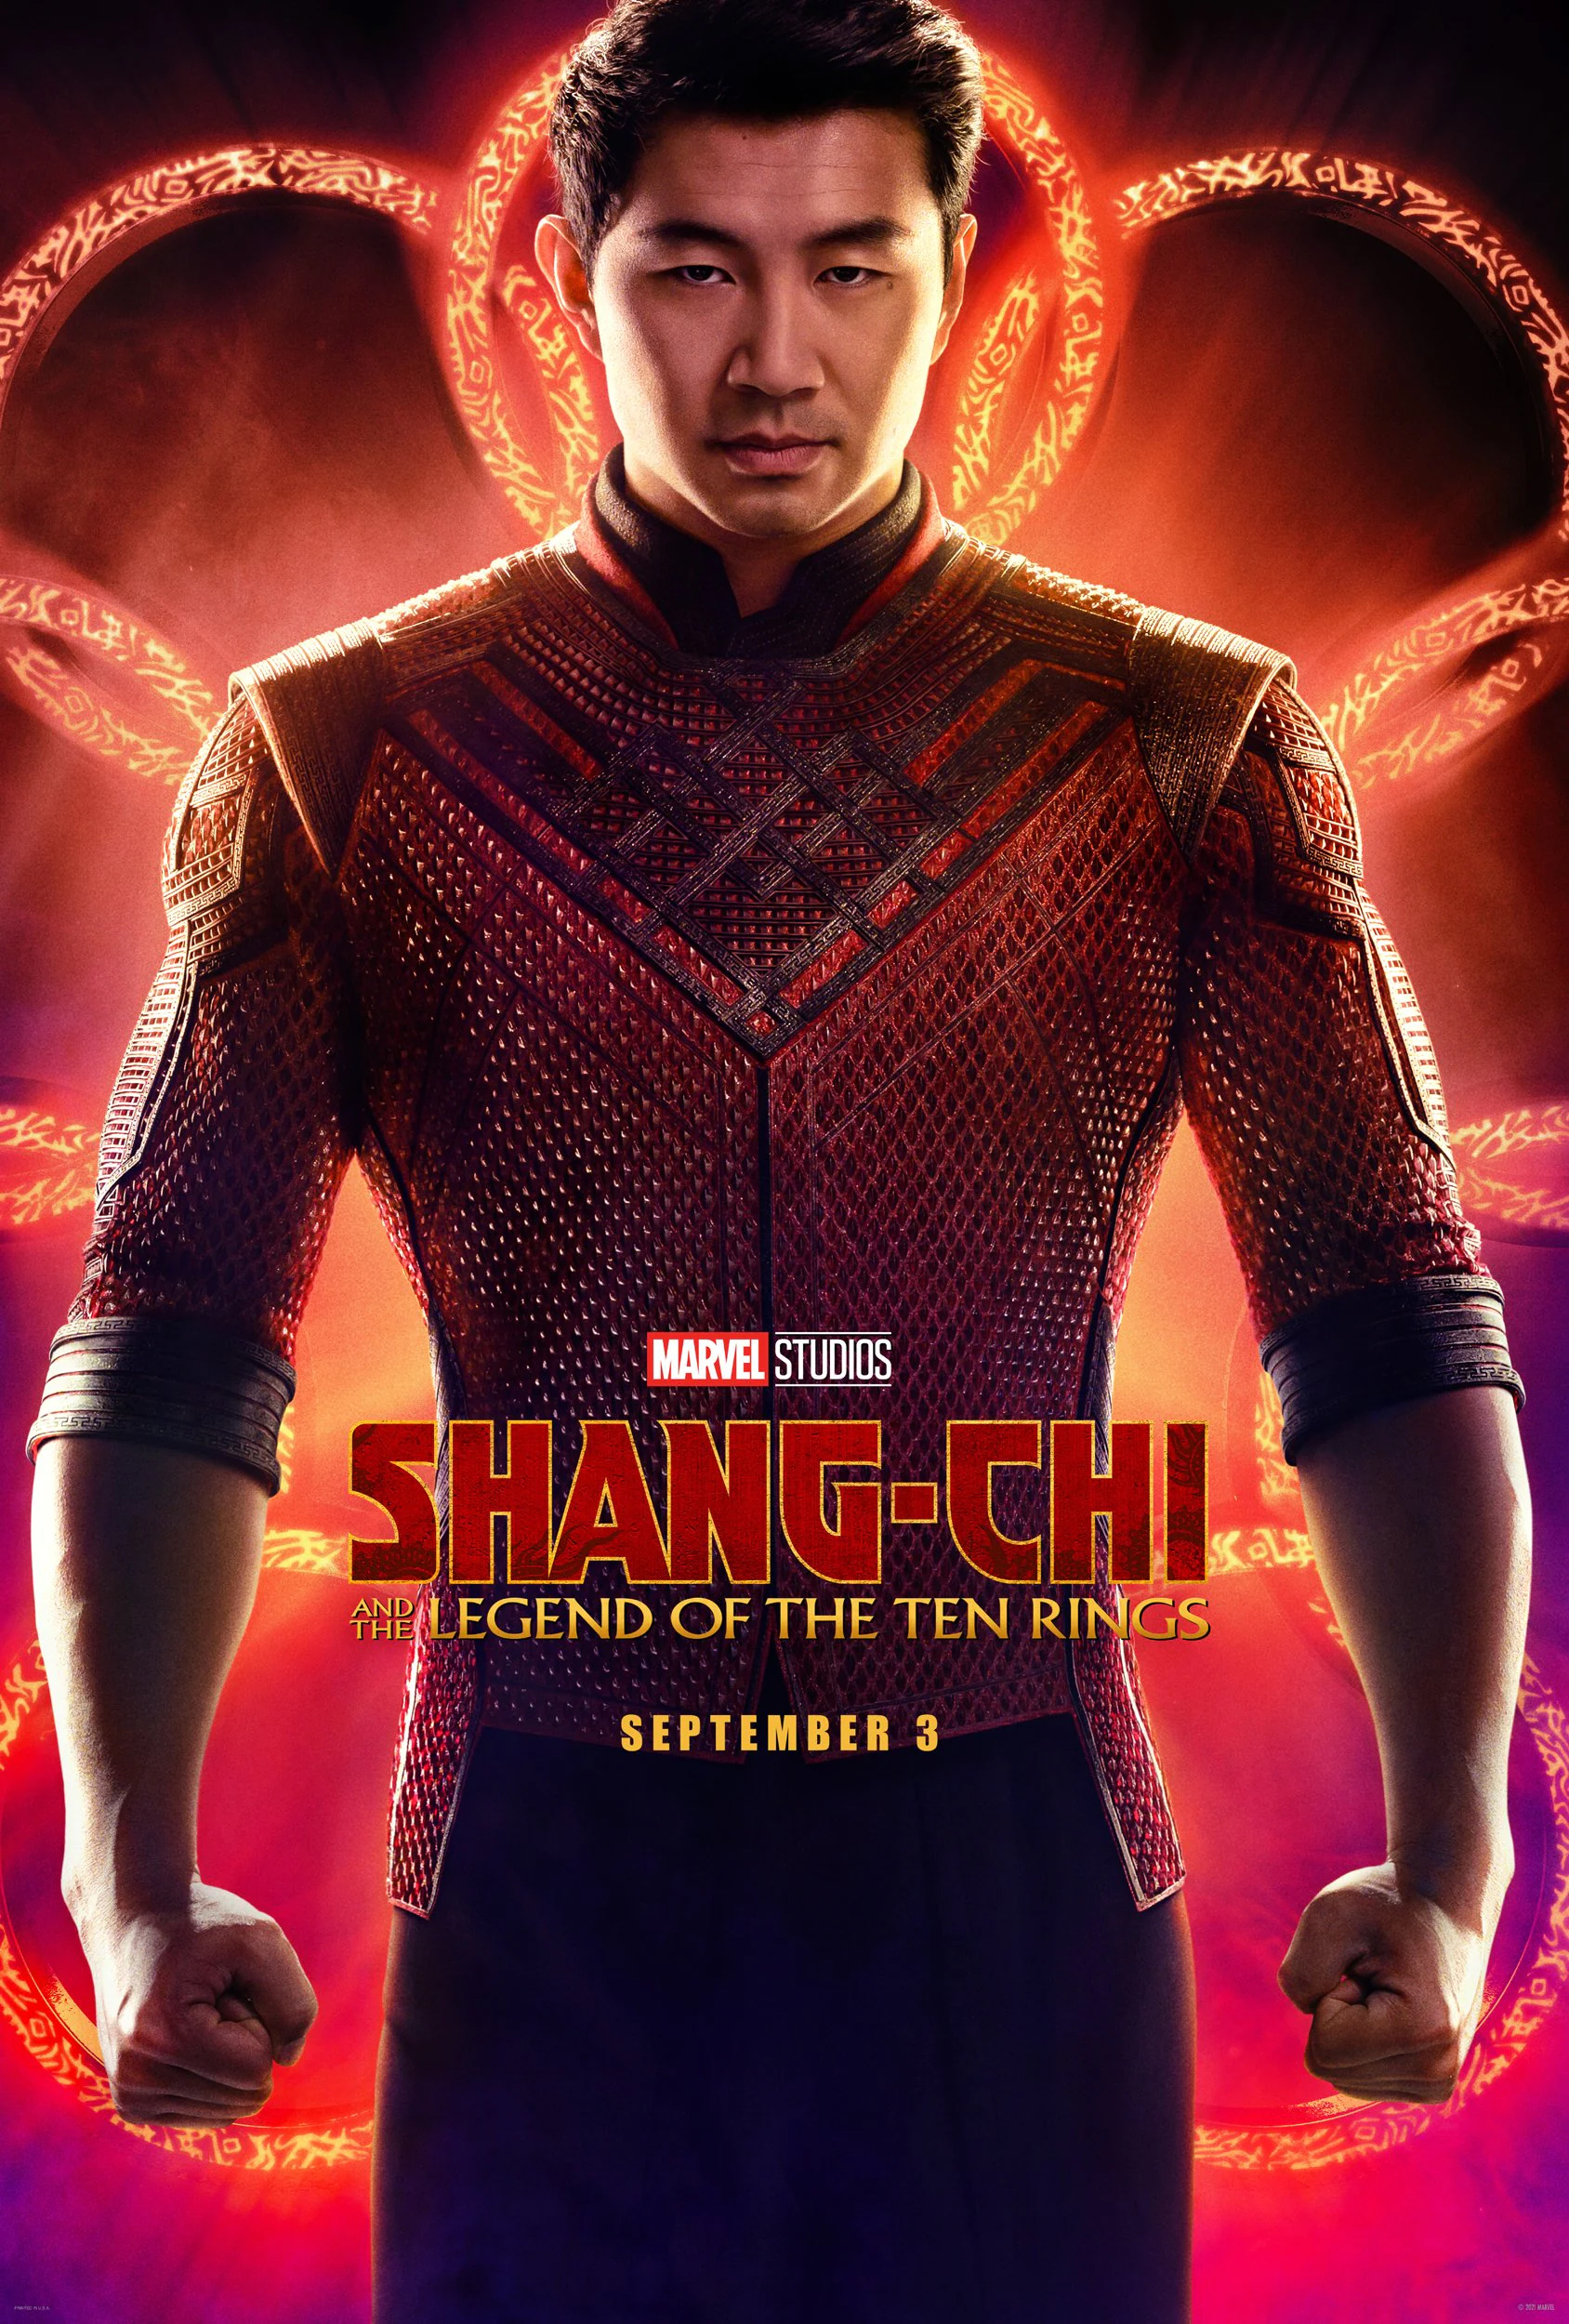 Shang-Chi box office weekend